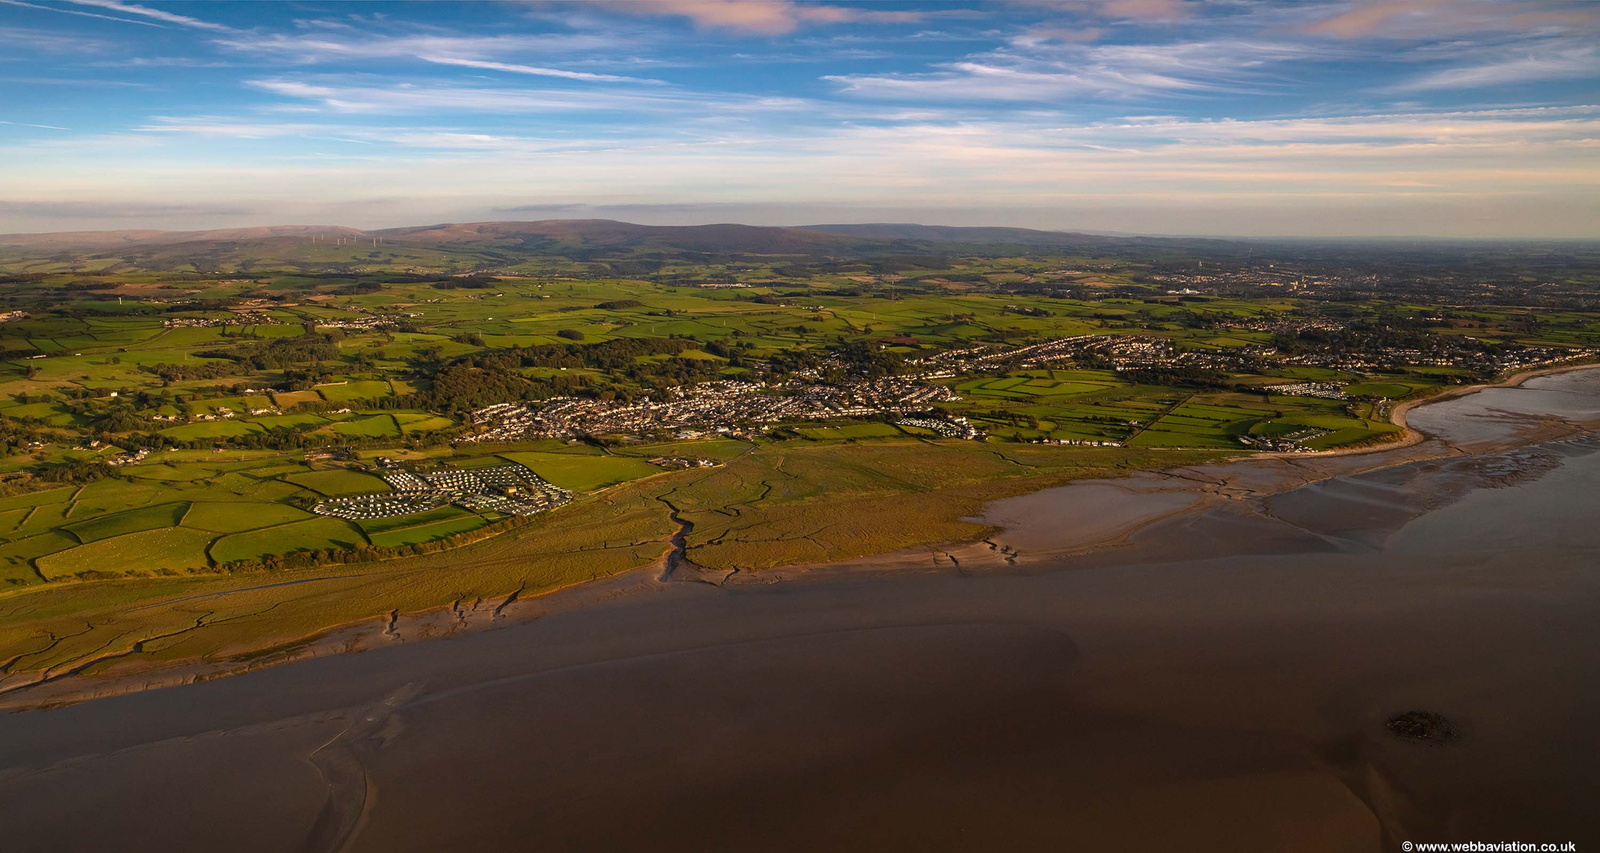 Bolton-le-Sands, Lancashire from the air